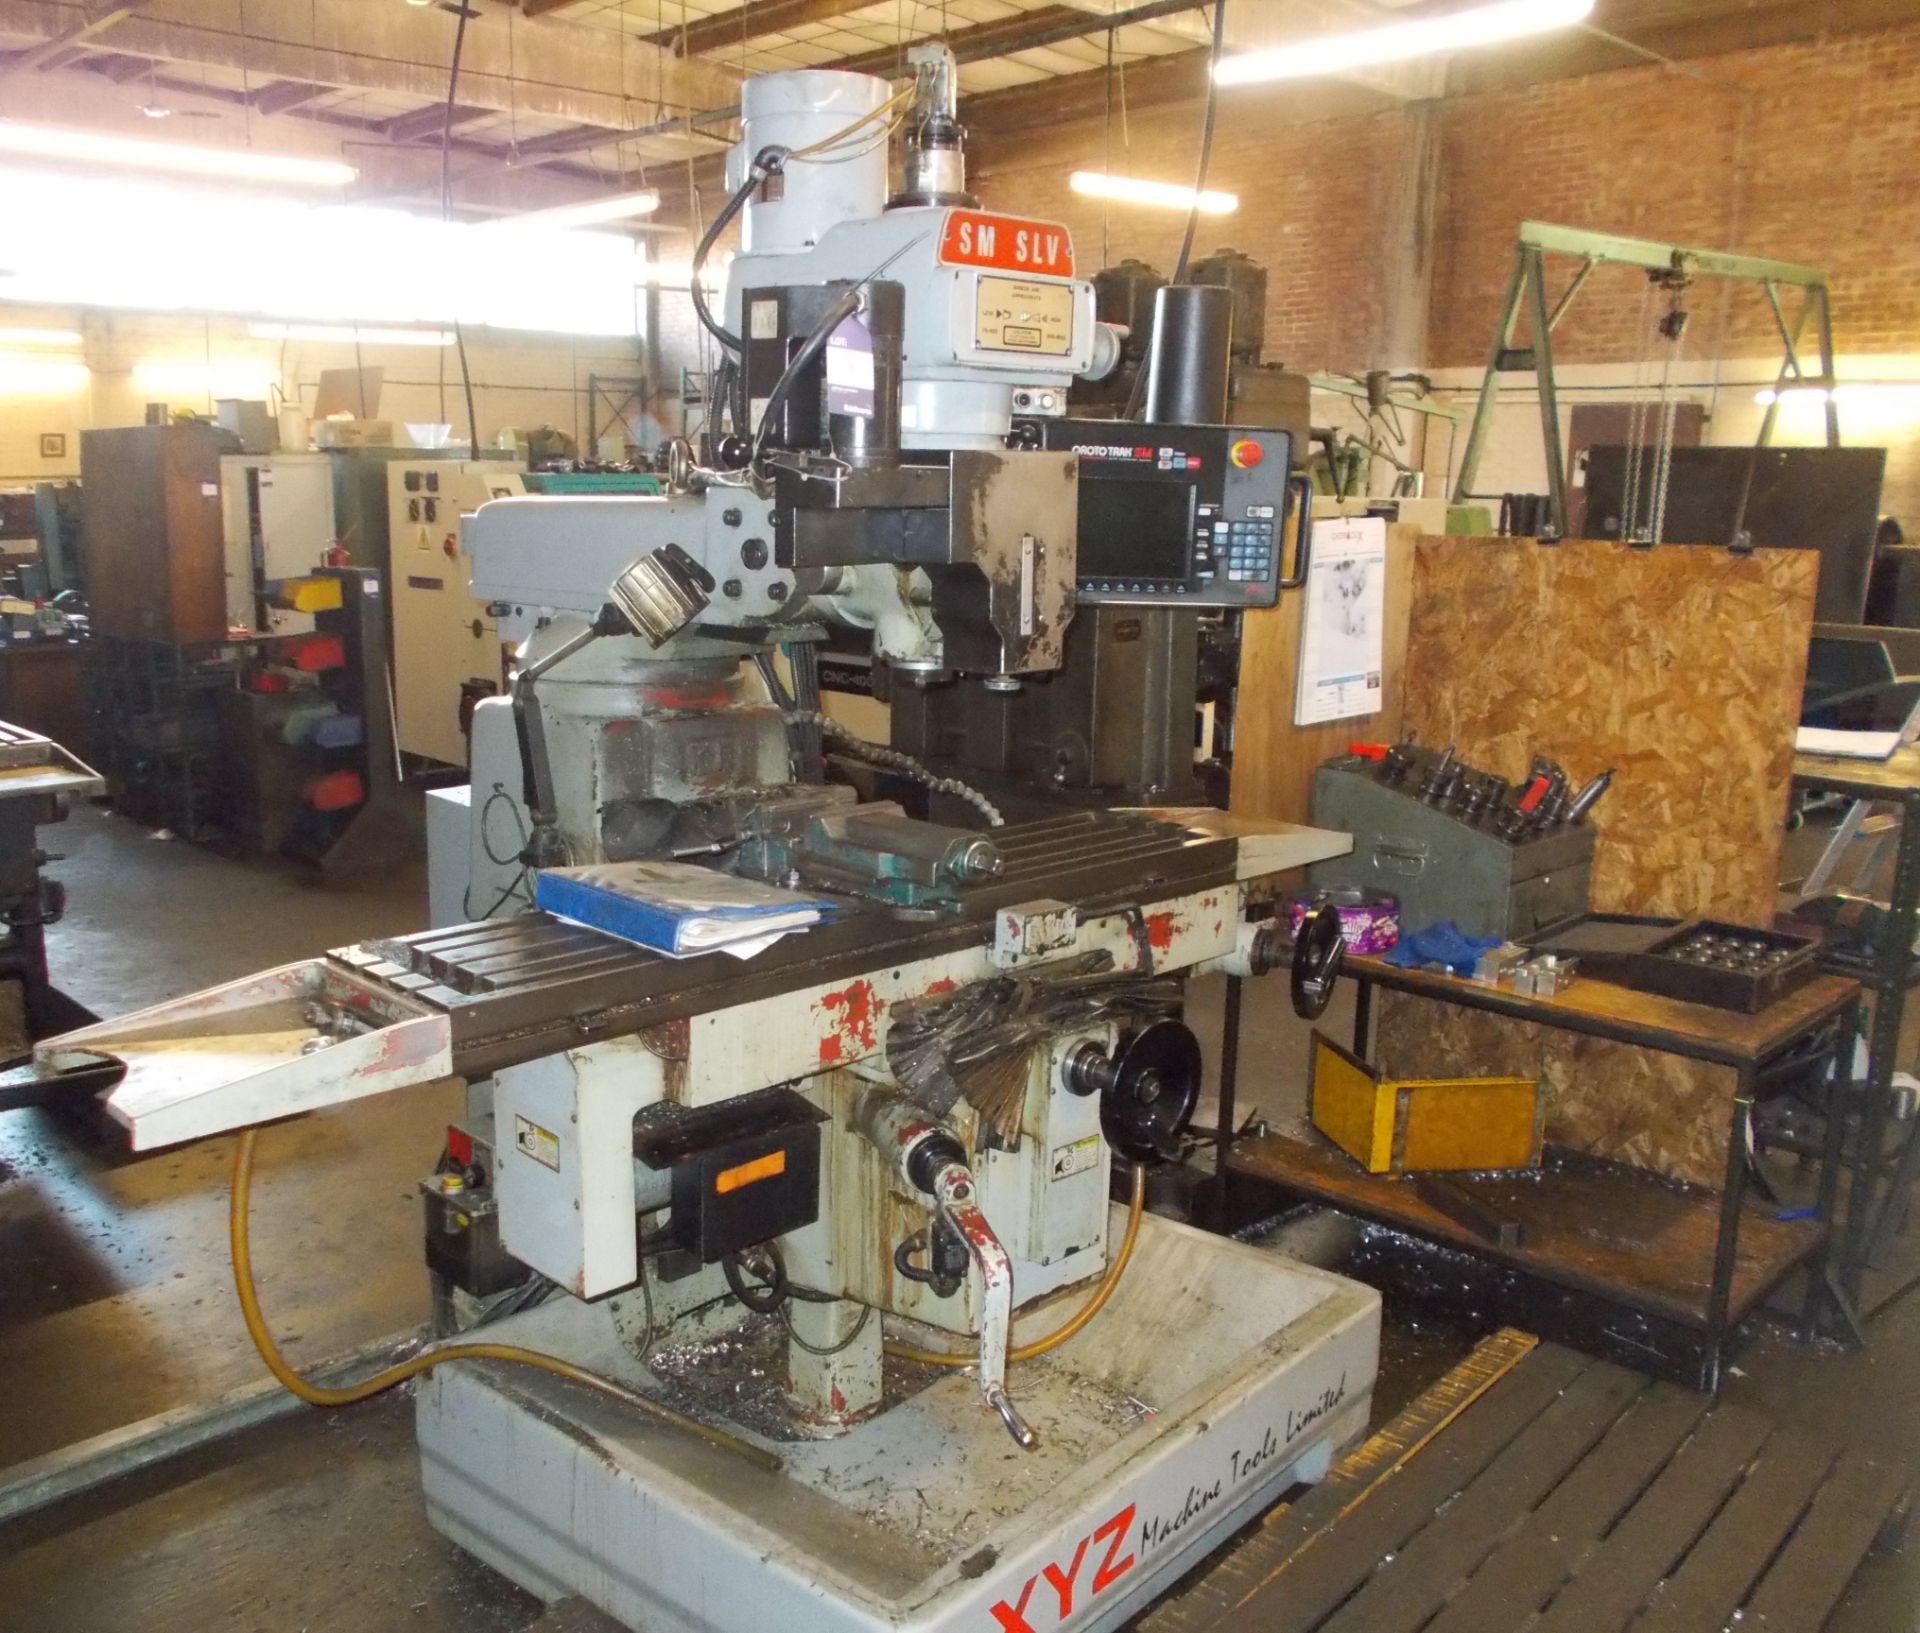 KRV 3000 CNC turret mill (Serial Number: 9820, Year: 2002), with ProtoTrak SM control, with quantity